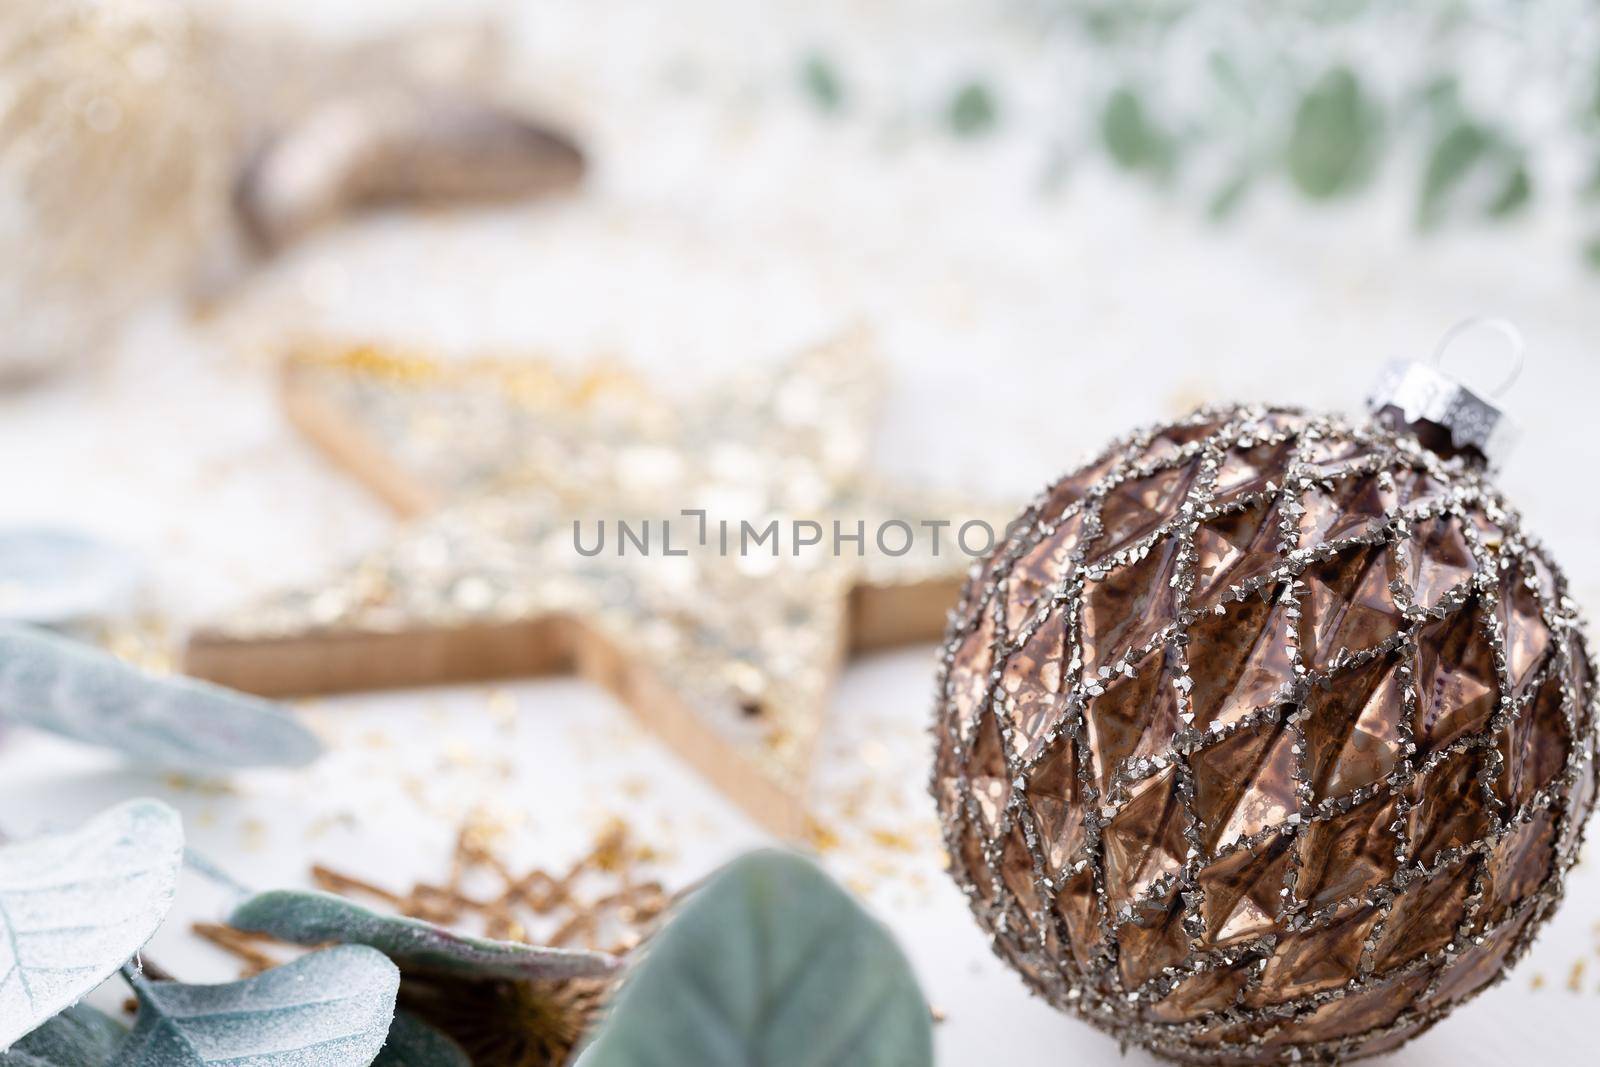 Christmas composition. Decorations on white background. Christmas, winter, new year concept. Flat lay, top view, copy space